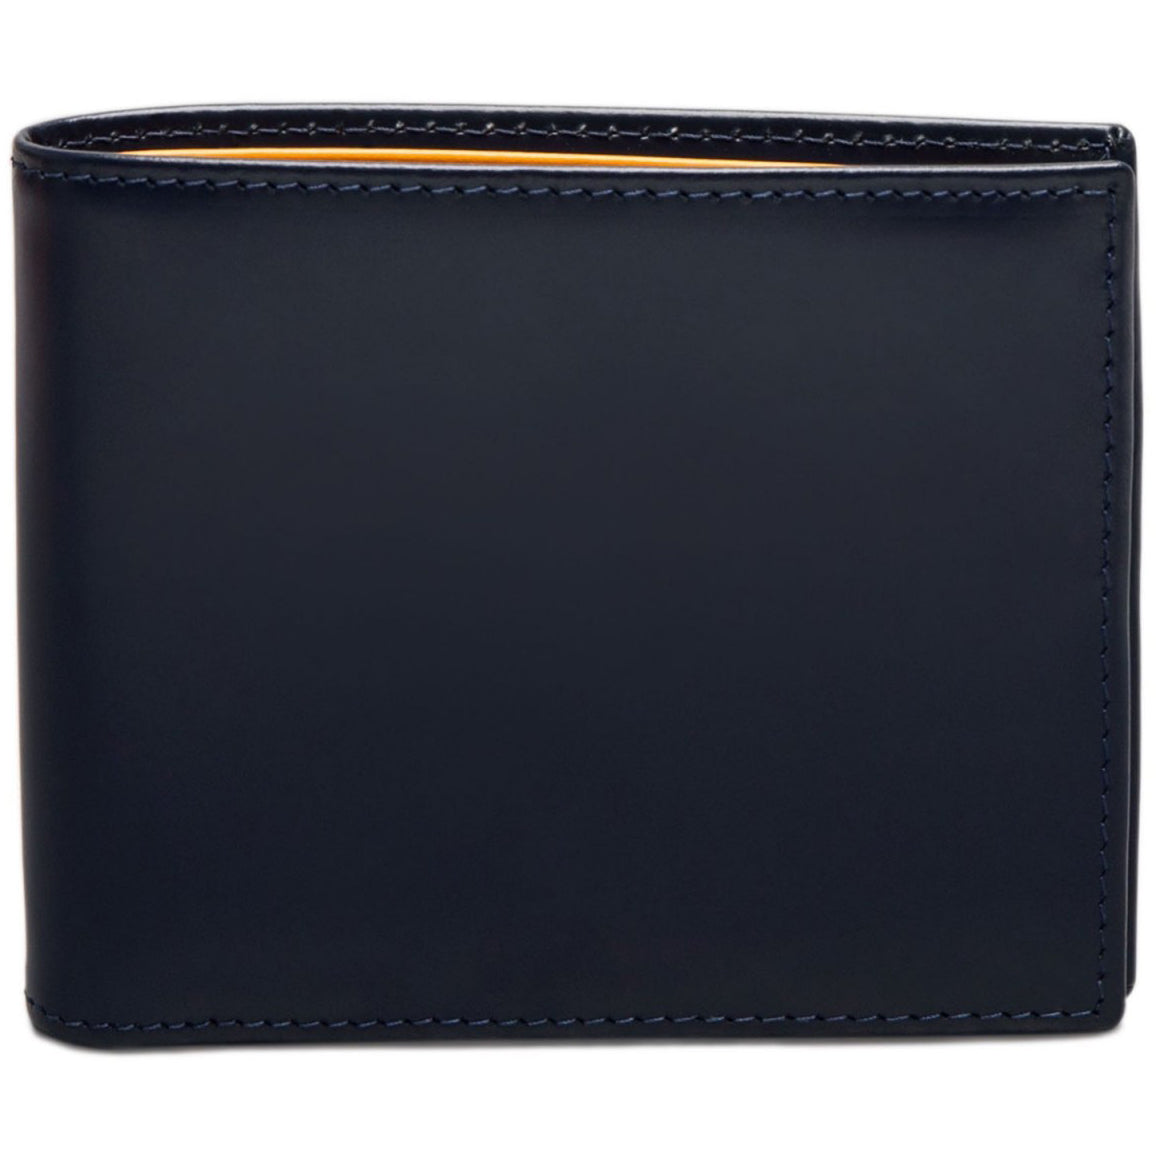 Ettinger Bridle Hide Collection Billfold Leather Wallet, Navy